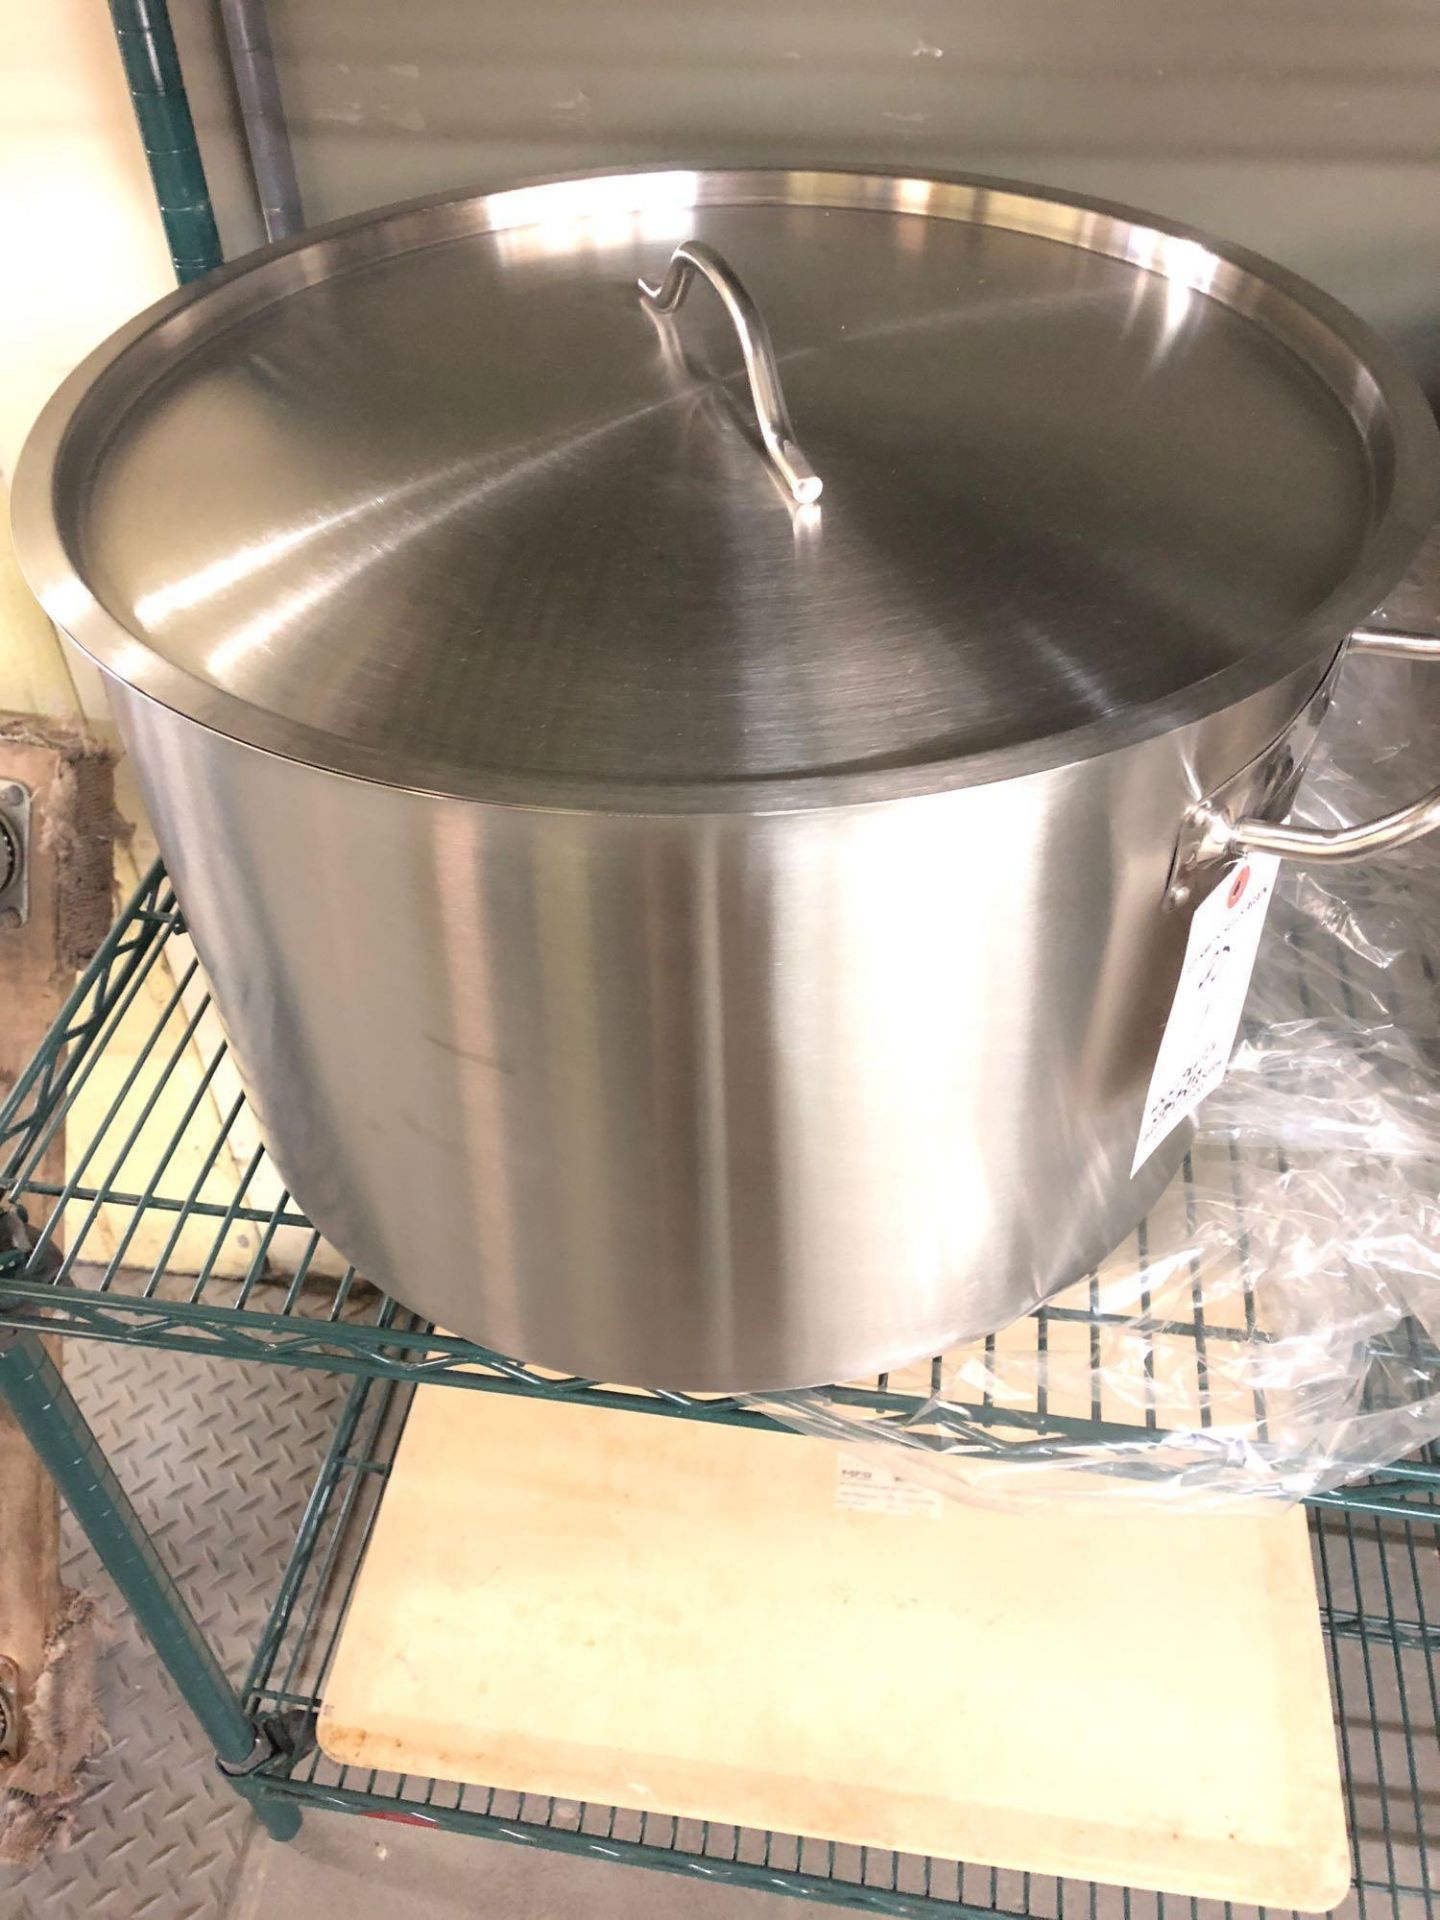 44 L stainless steel stockpot with cover